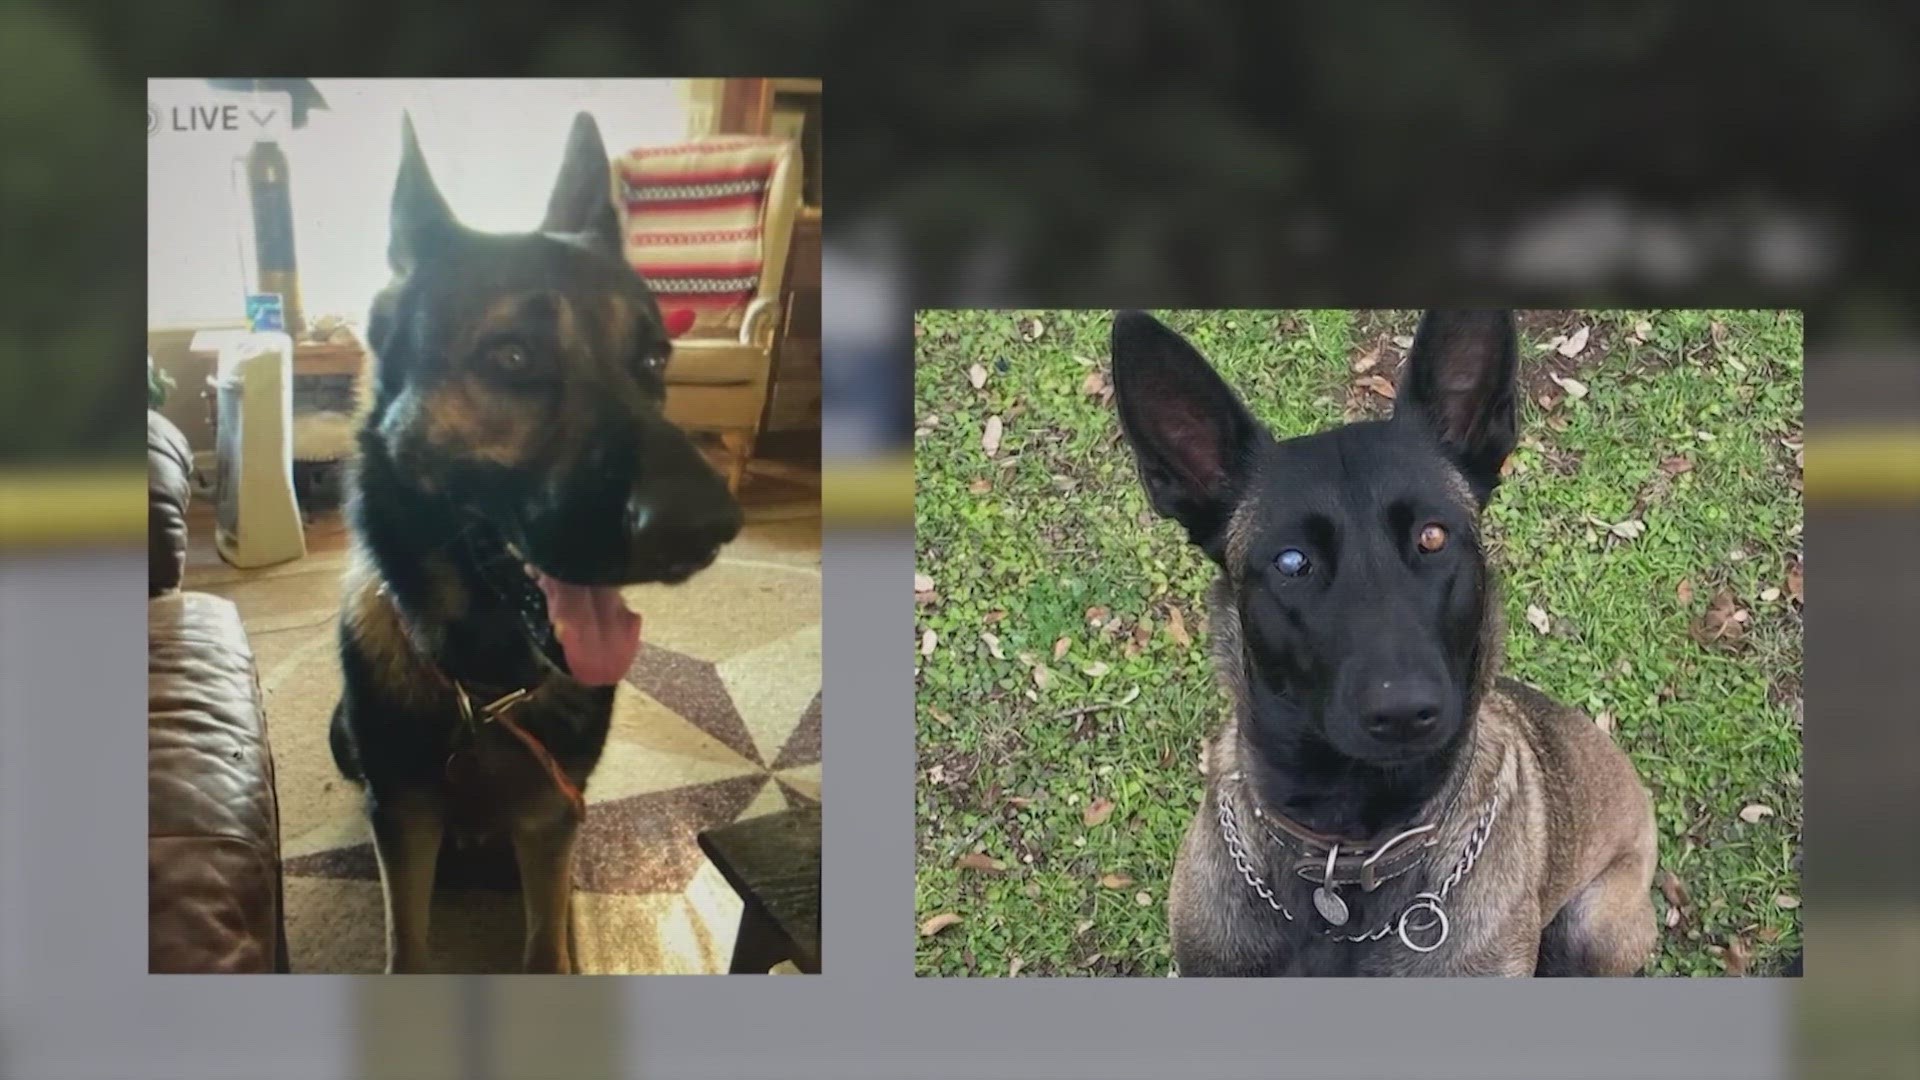 The community has been helping the veteran search for the missing dogs.